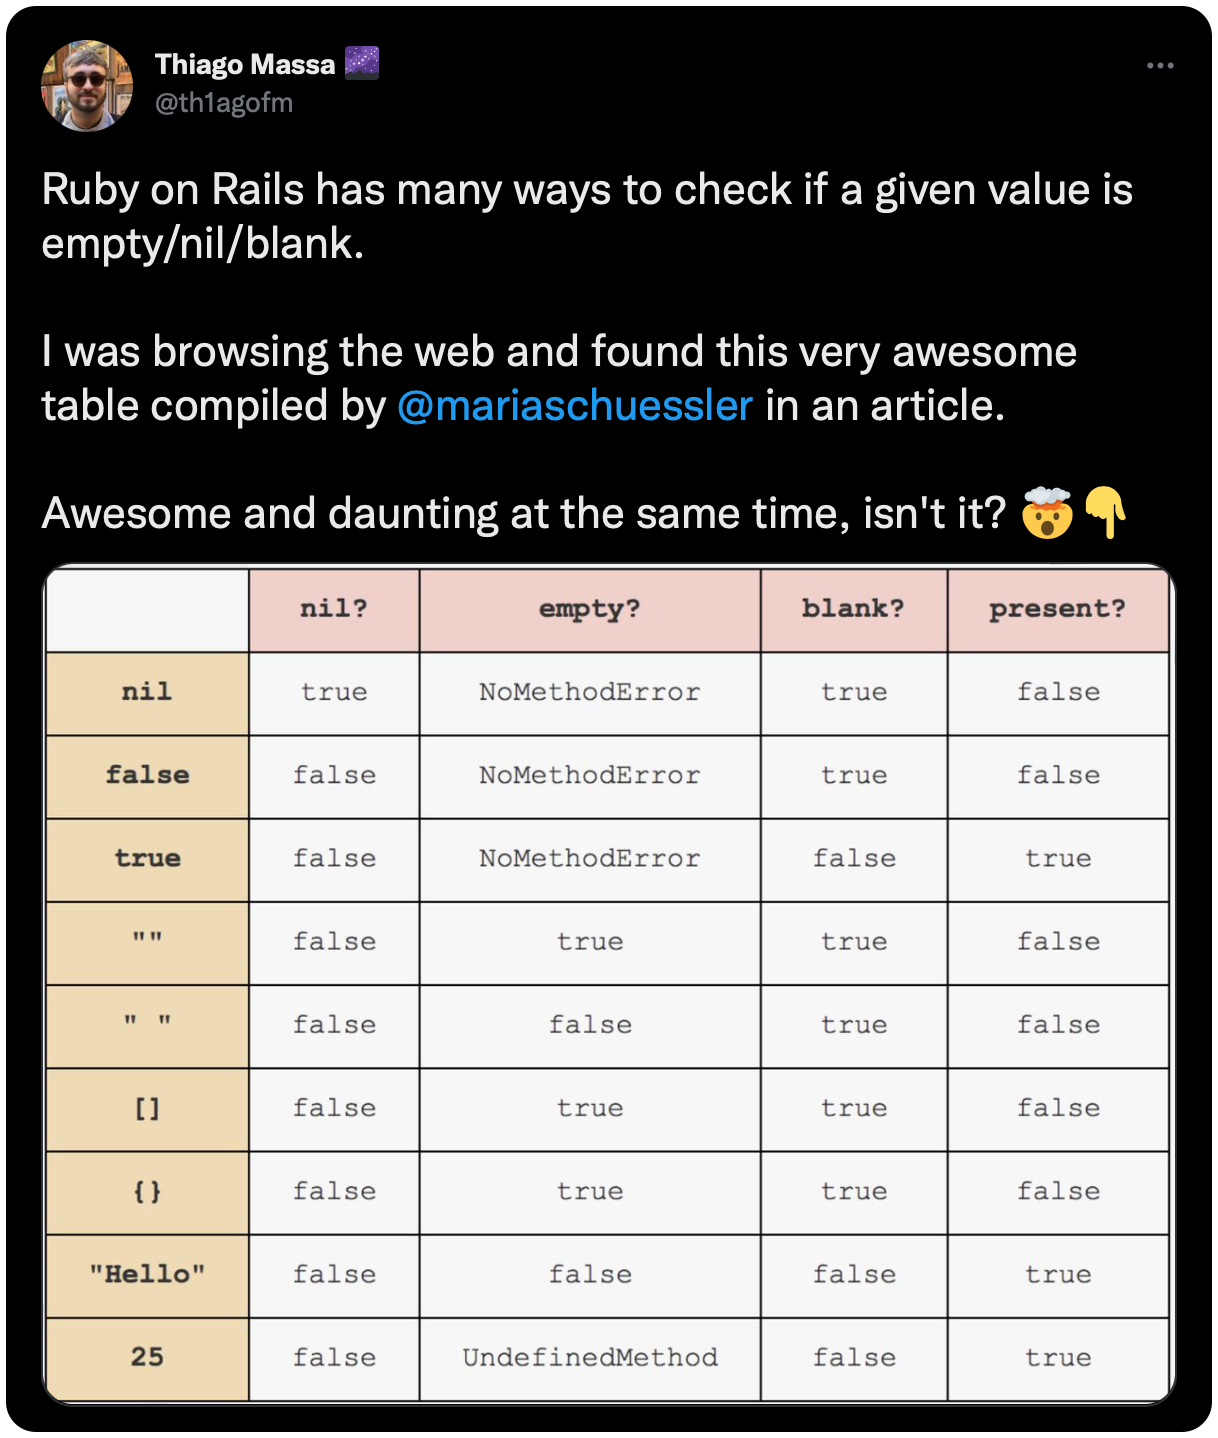 Ruby on Rails has many ways to check if a given value is empty/nil/blank. I was browsing the web and found this very awesome table compiled by @mariaschuessler in an article. Awesome and daunting at the same time, isn't it? 